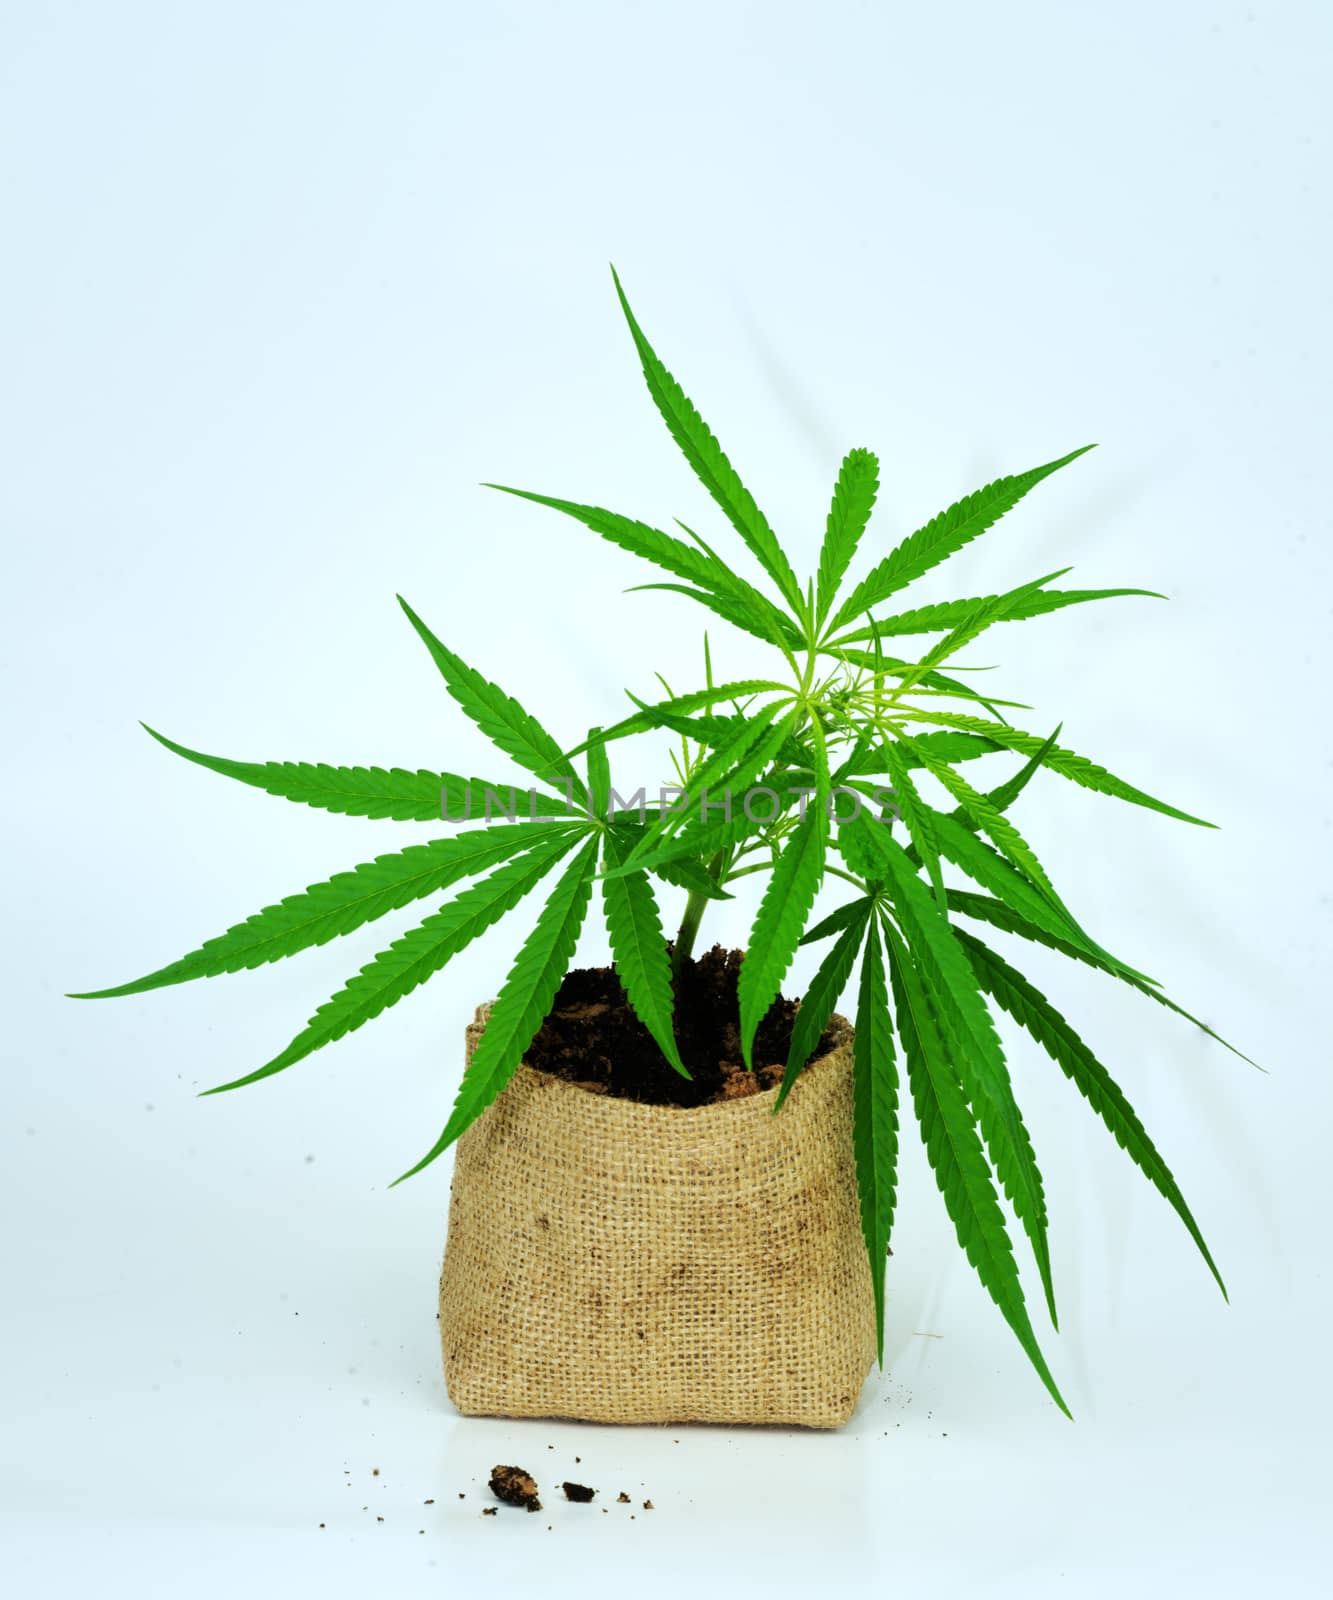 The growing cannabis plant is cultivated in a special type of soil bag separating the white background.